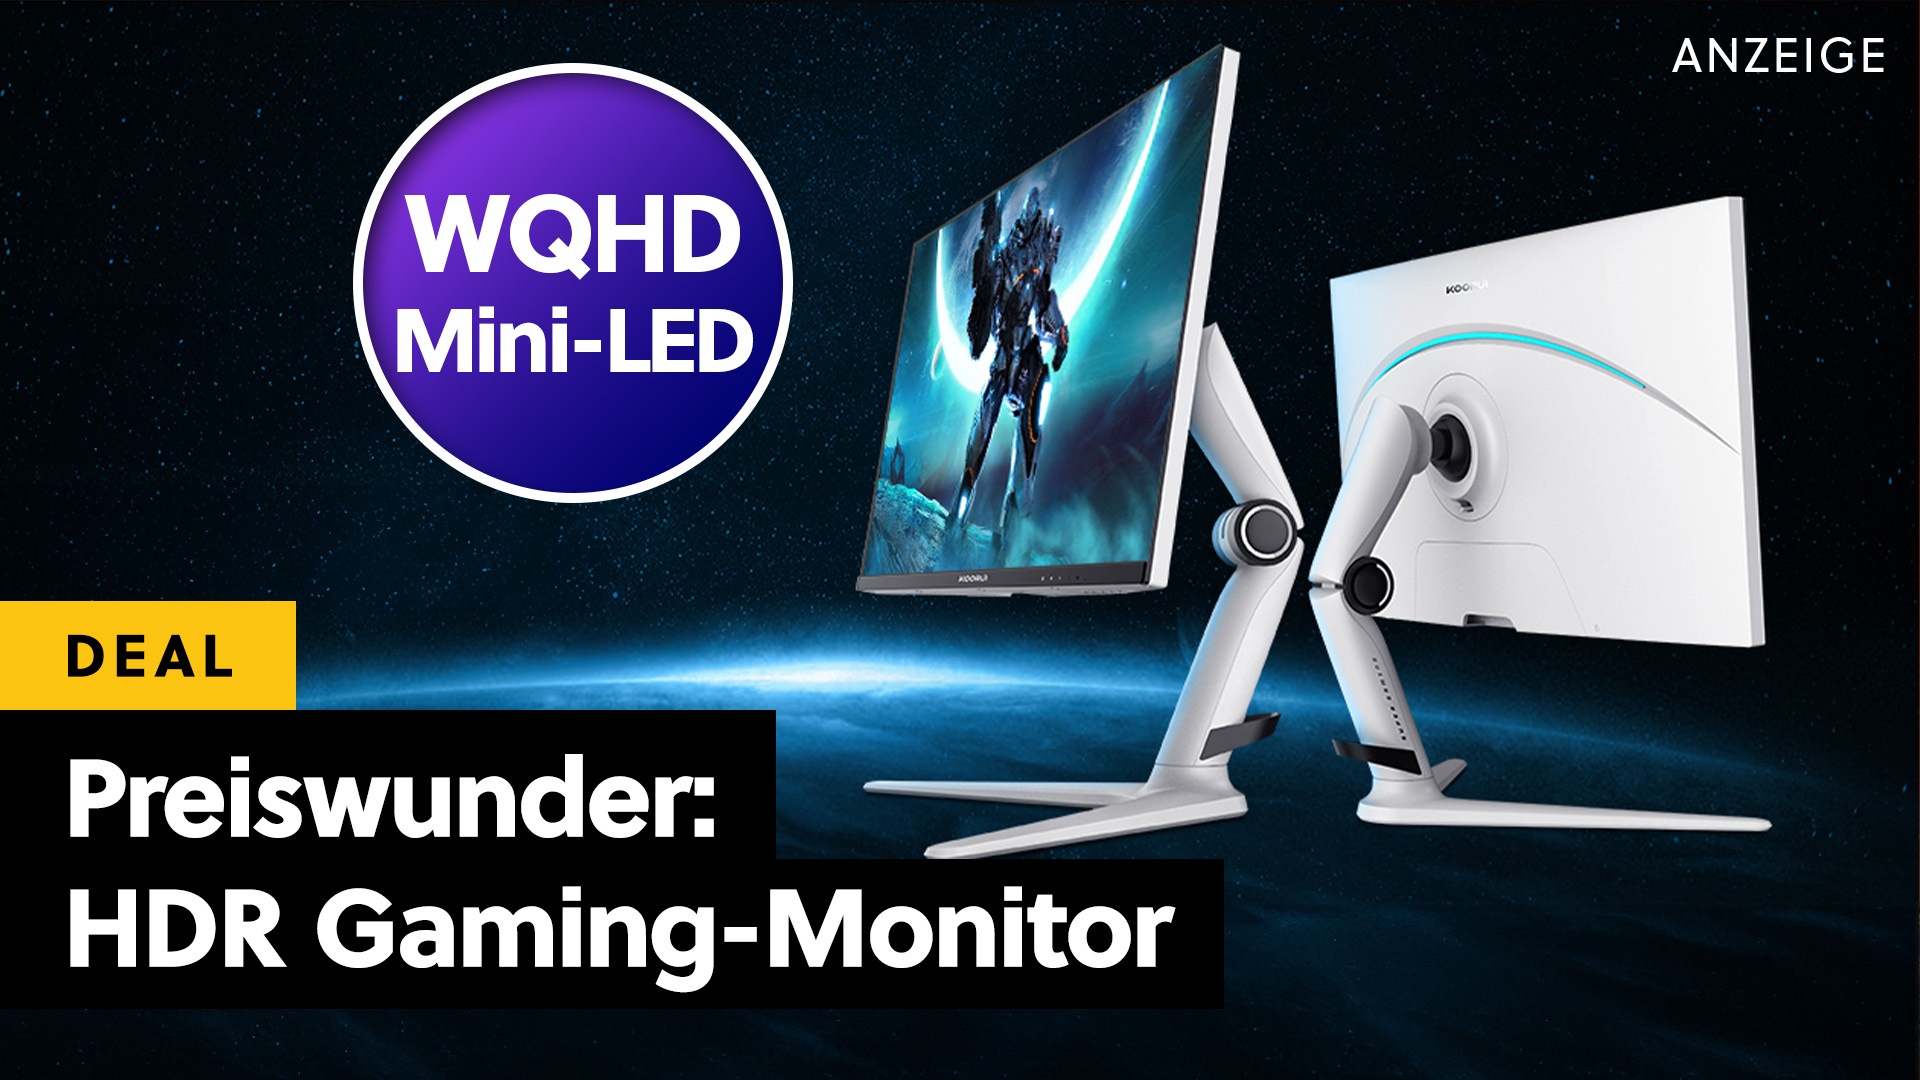 Otherwise, you'll have to pay triple the amount for the HDR performance of this amazing WQHD gaming monitor with mini LED!